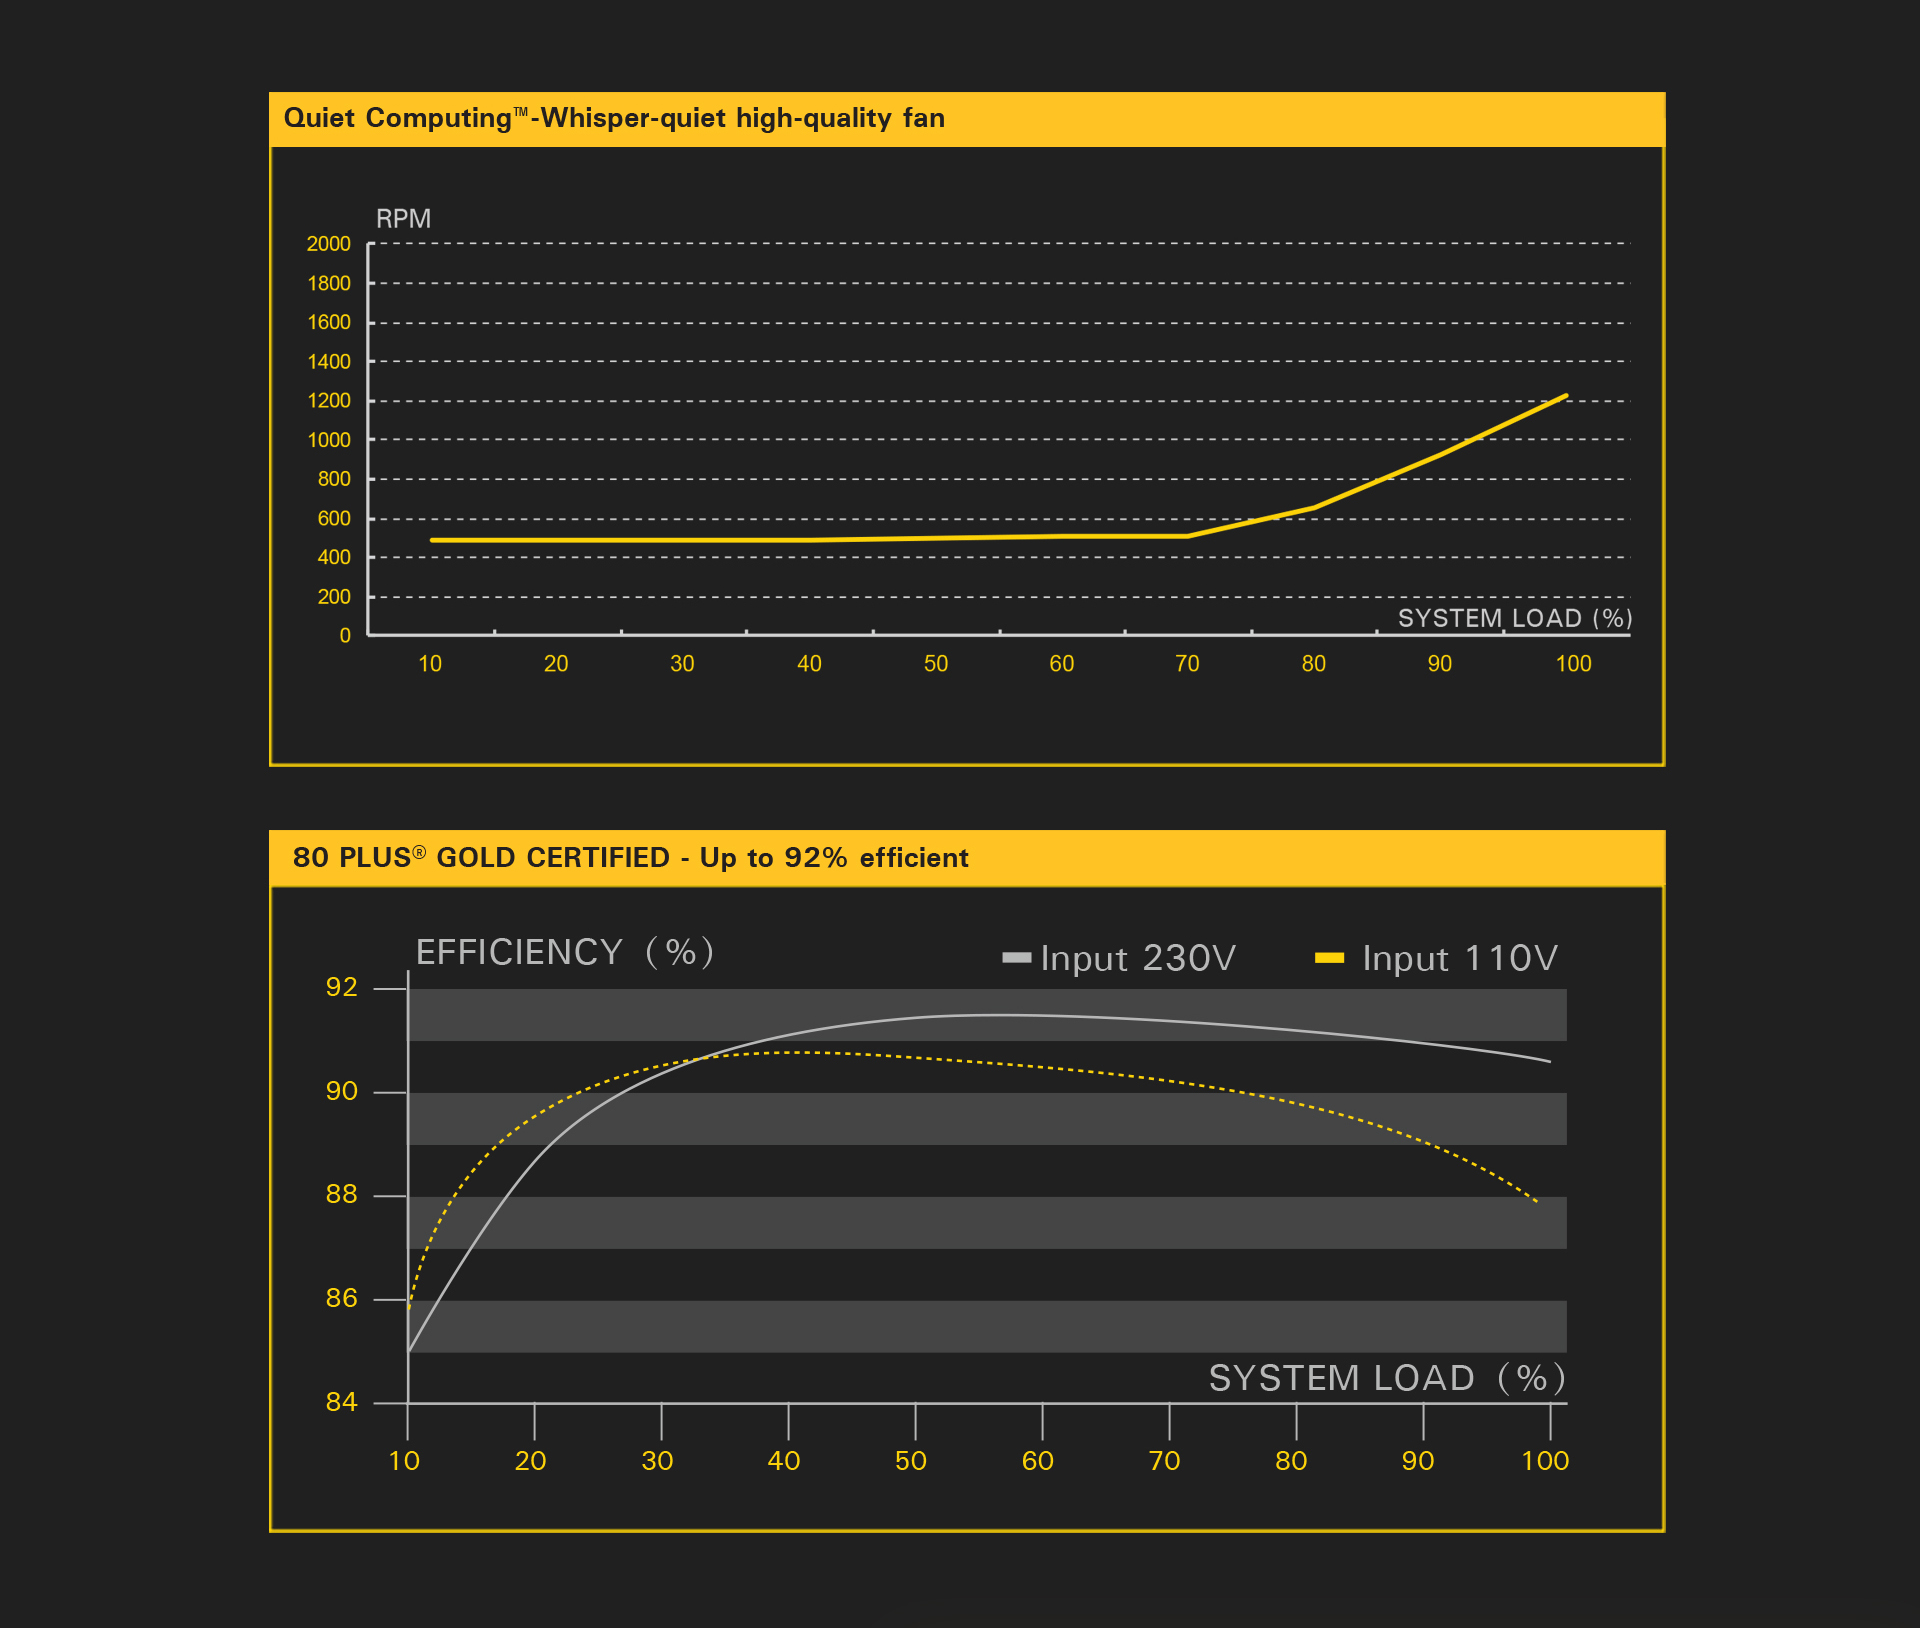 Graphs for Quite Computing Whisper-Quiet High-Quality Fan and 80 PLUS GOLD CERTIFIED Is Up to 92% Efficient